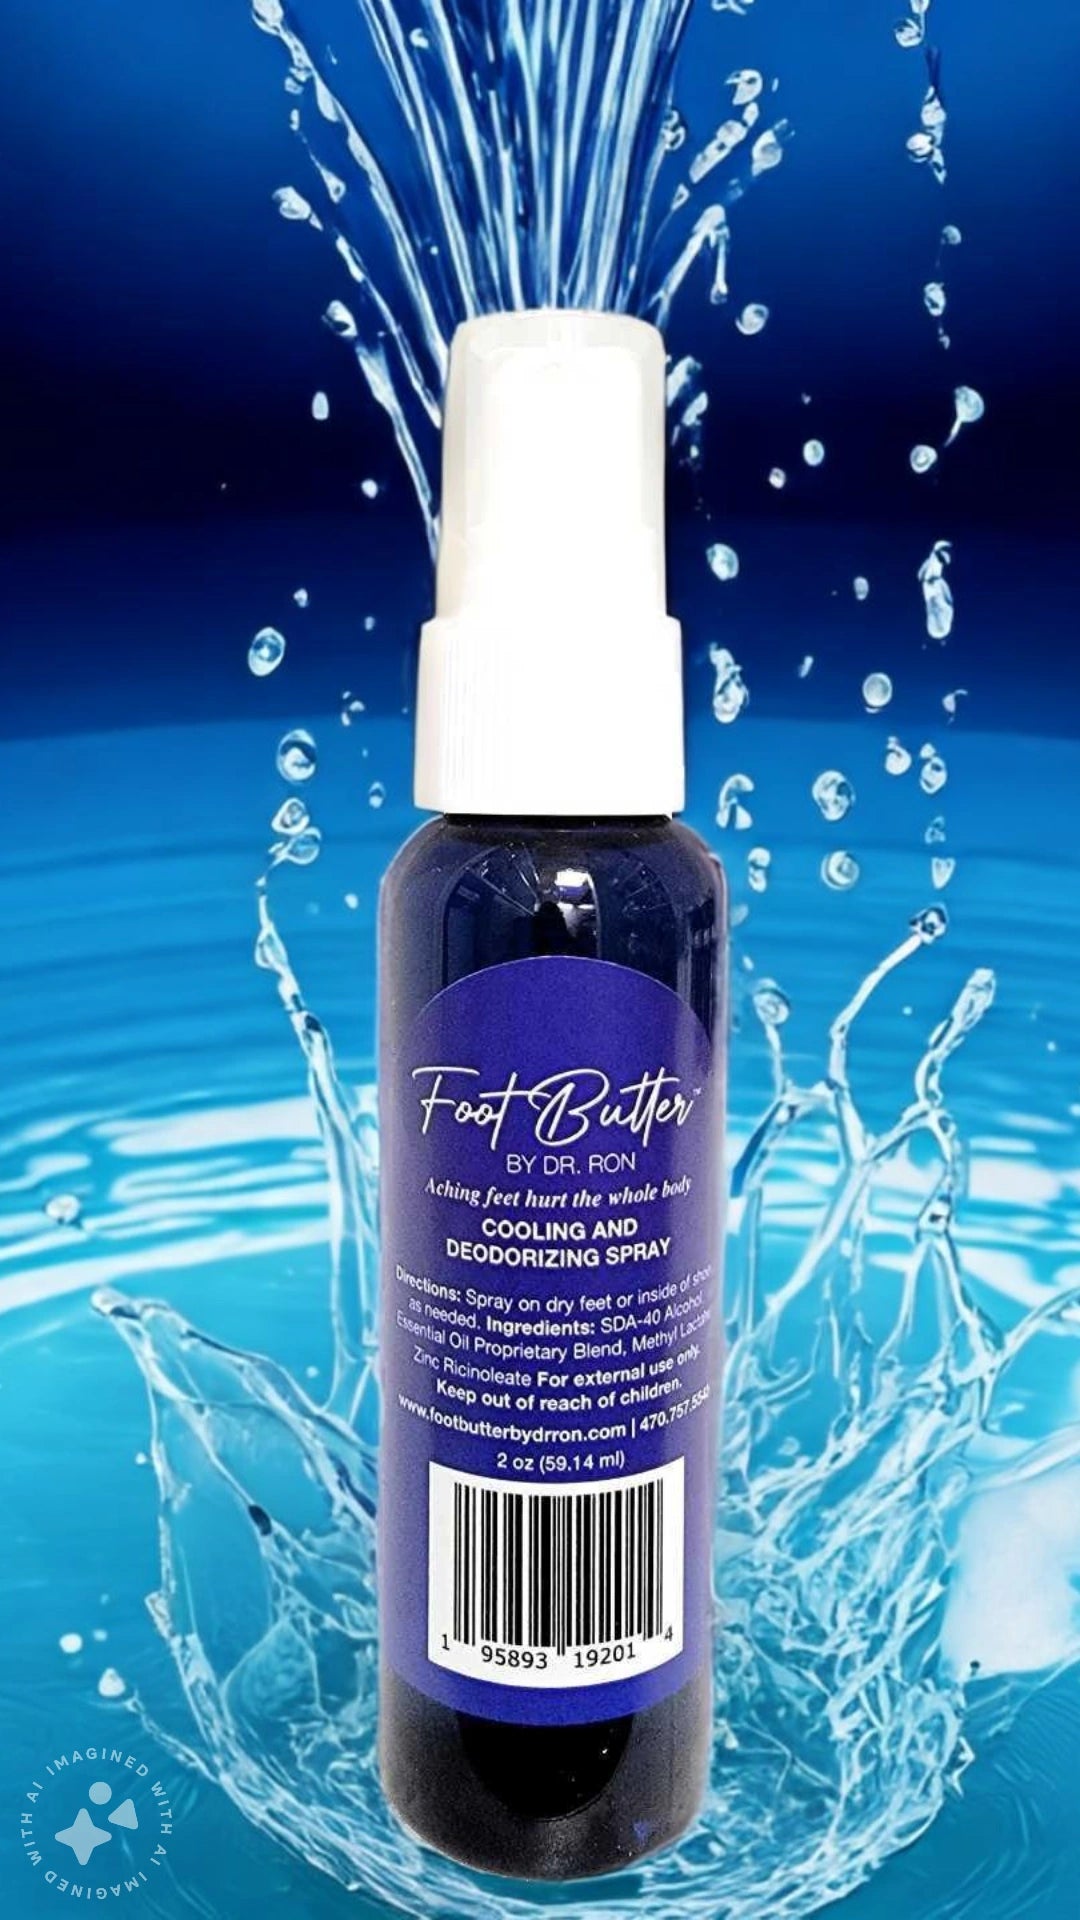 COOLING SPRAY Foot Butter by Dr Ron Cooling & Deodorizing Spray - Lave